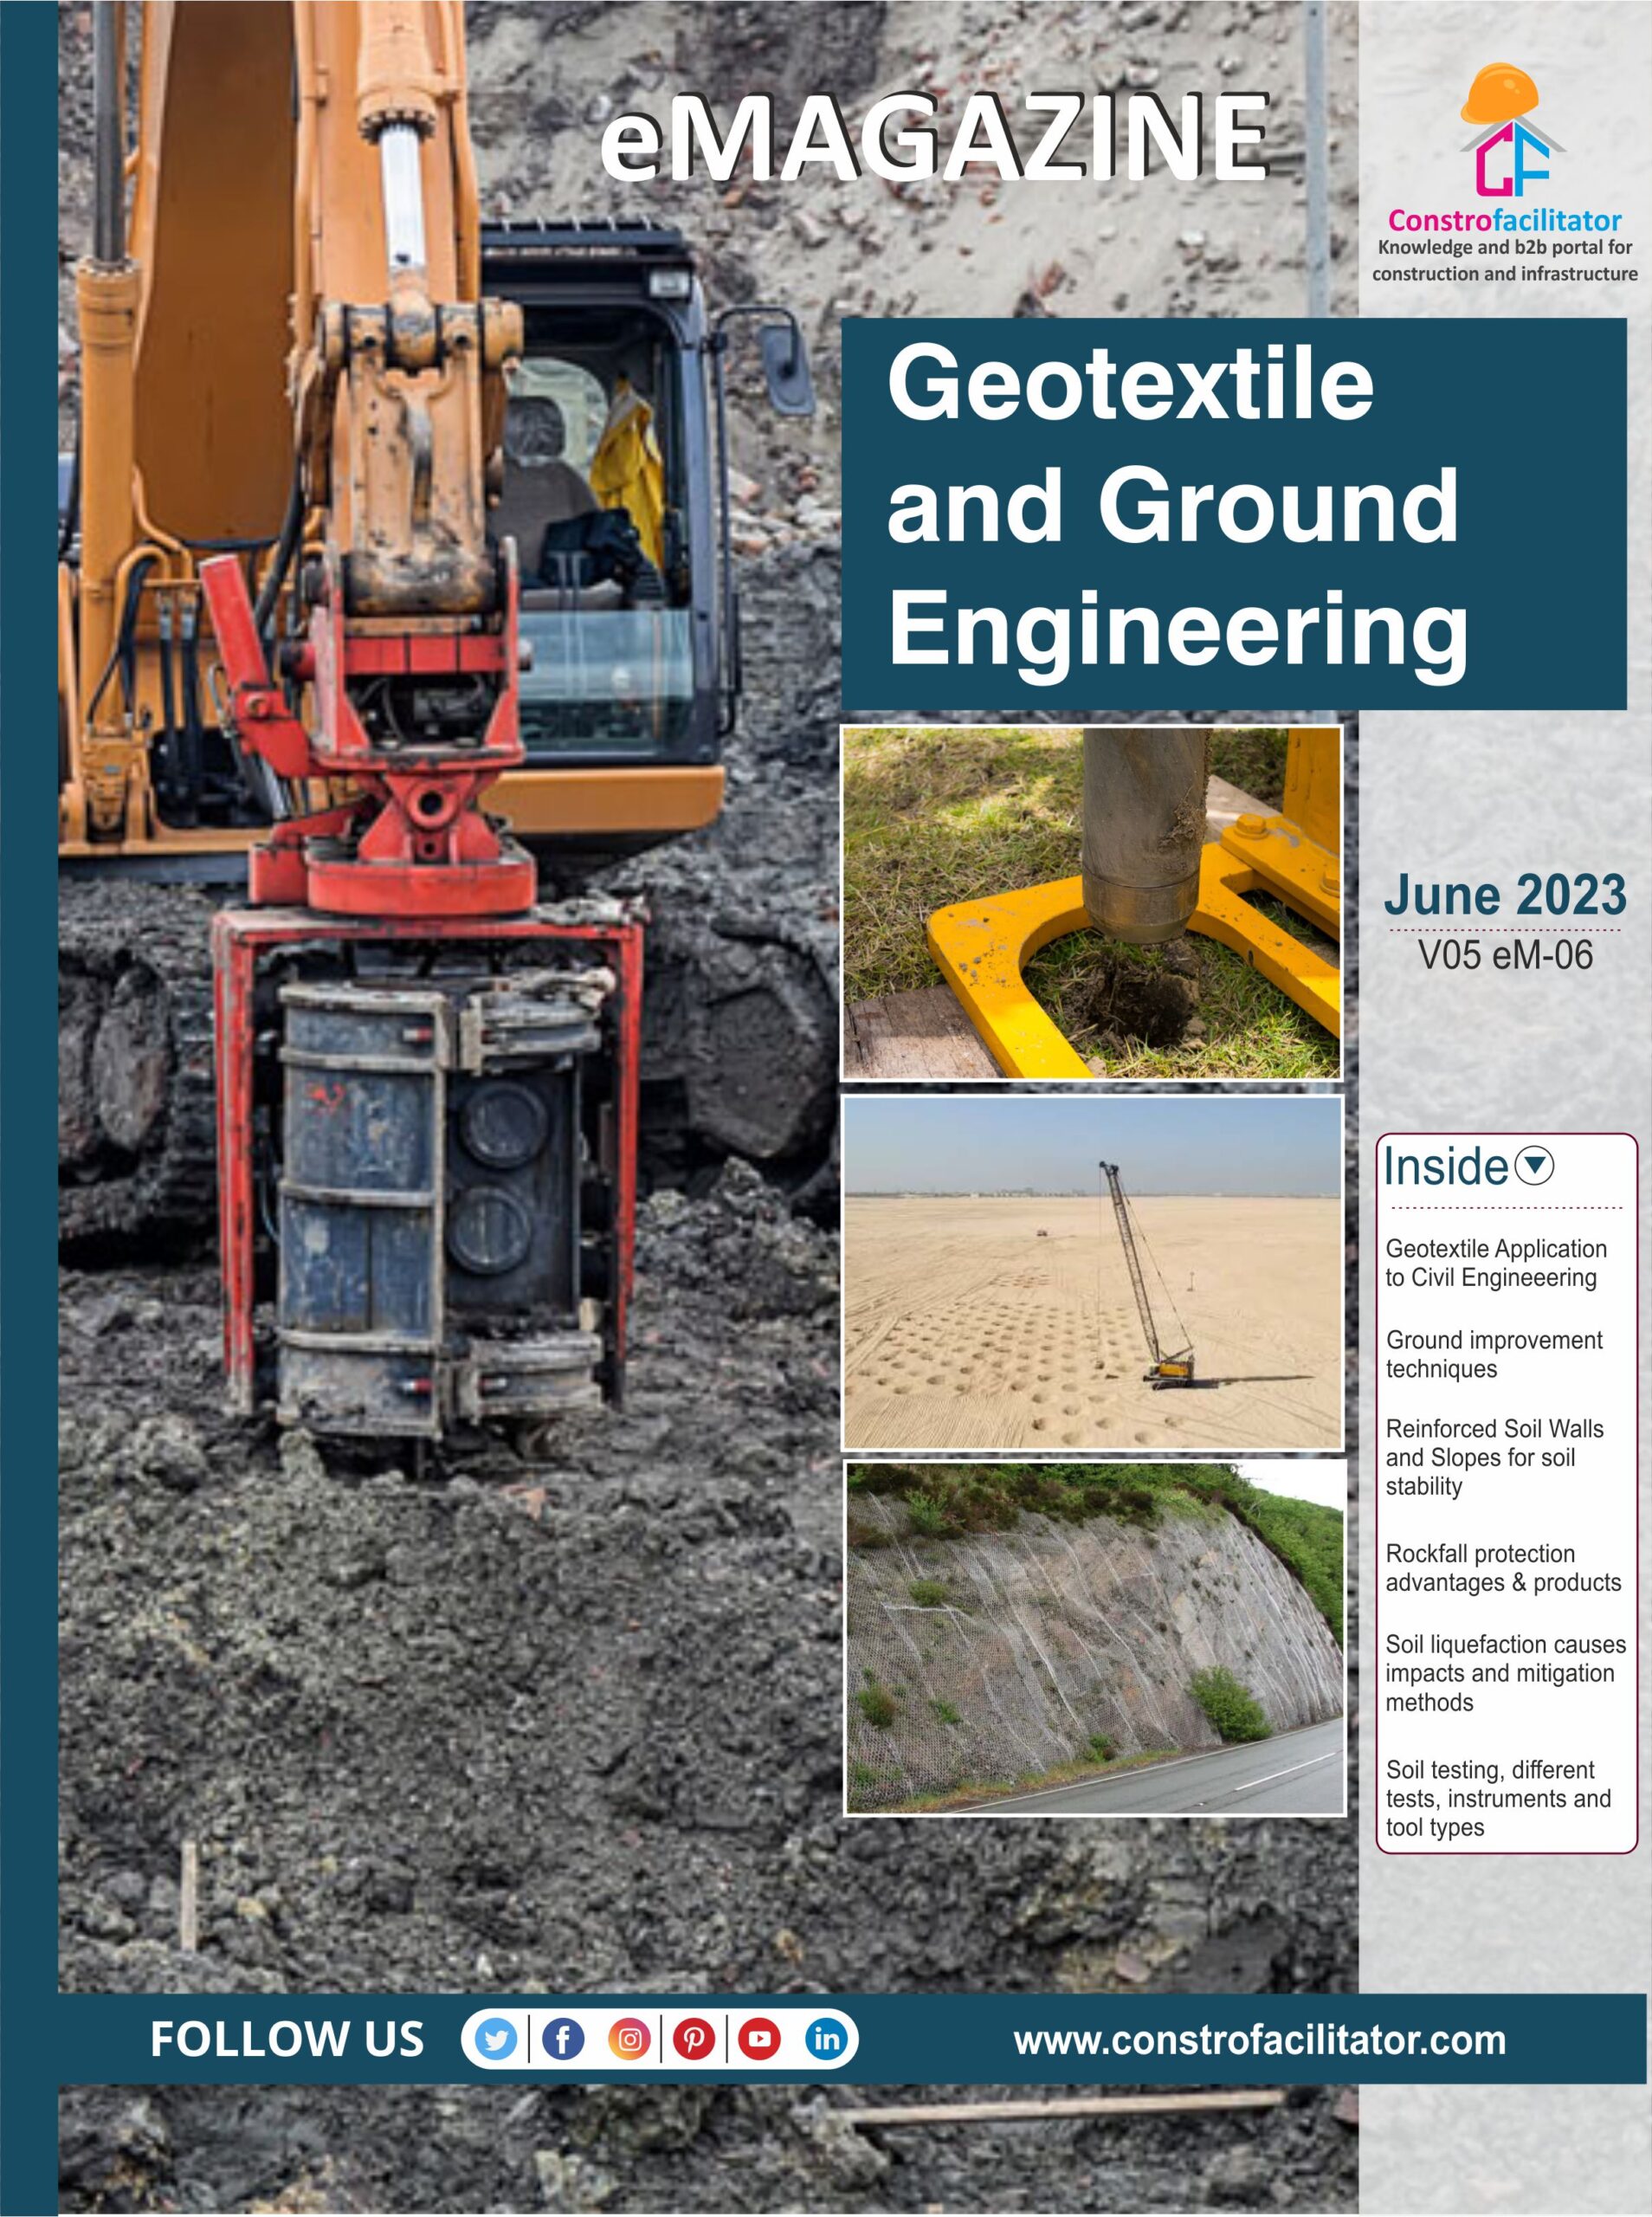 Geotextile and Ground Engineering